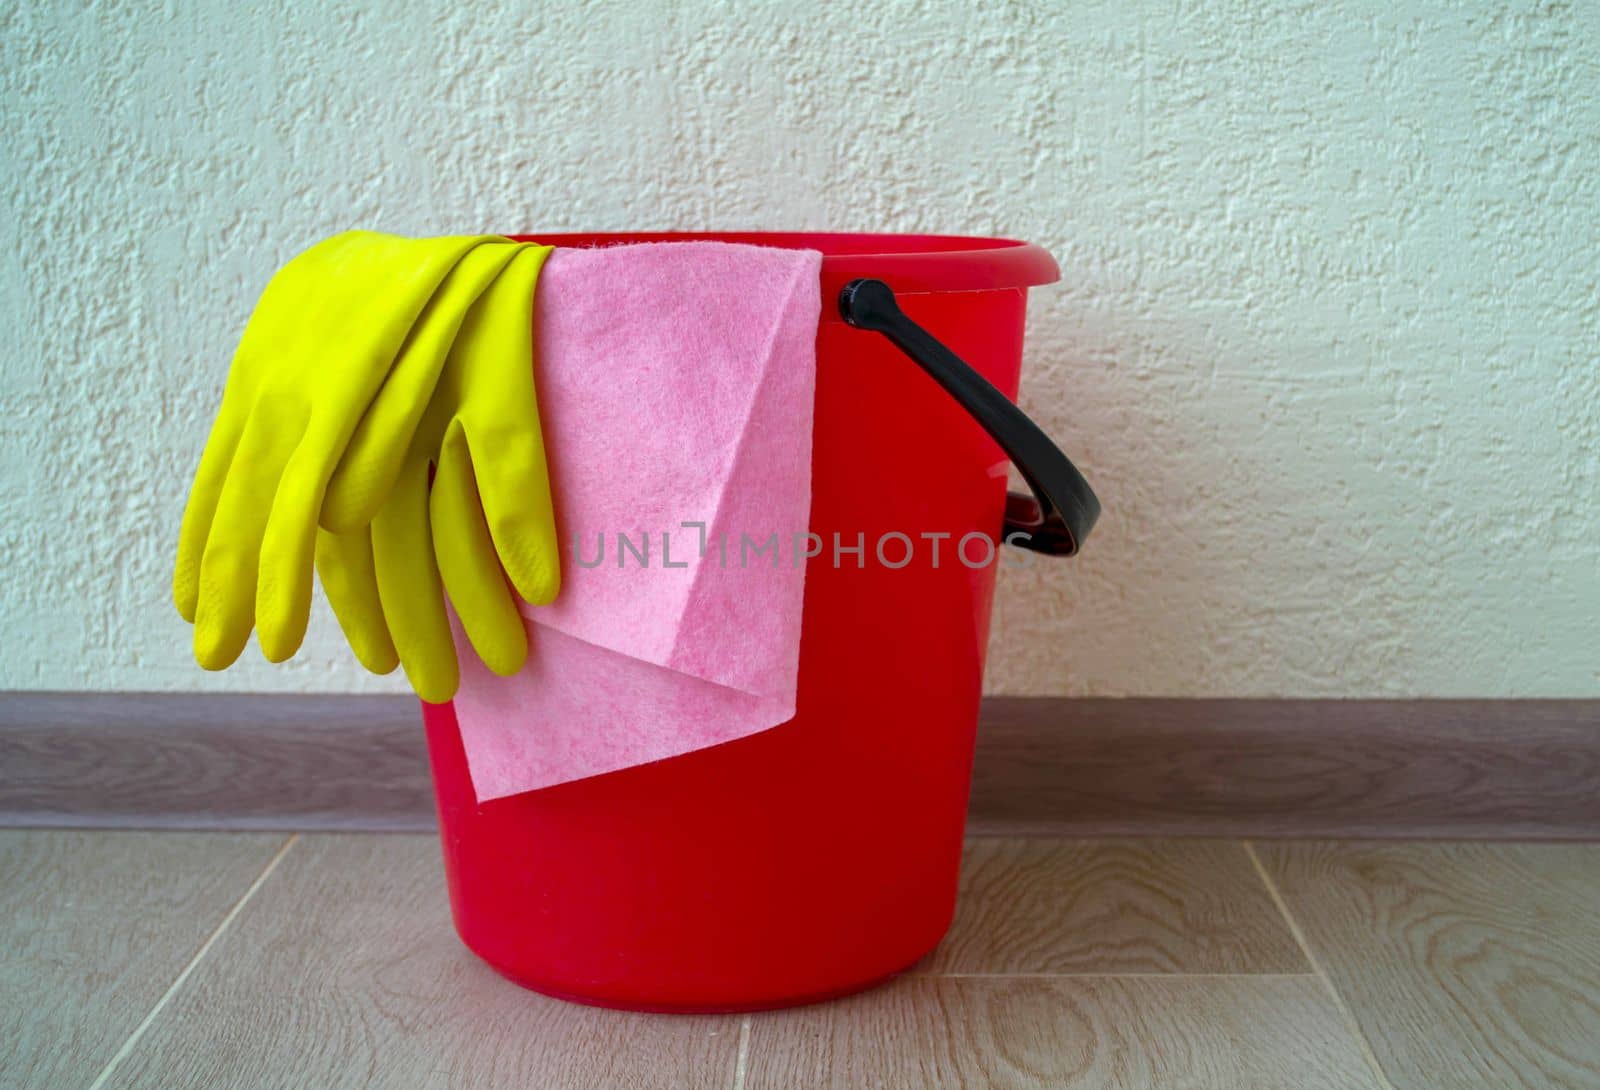 House cleaning. The photo shows a red bucket, rubber gloves and a rag.